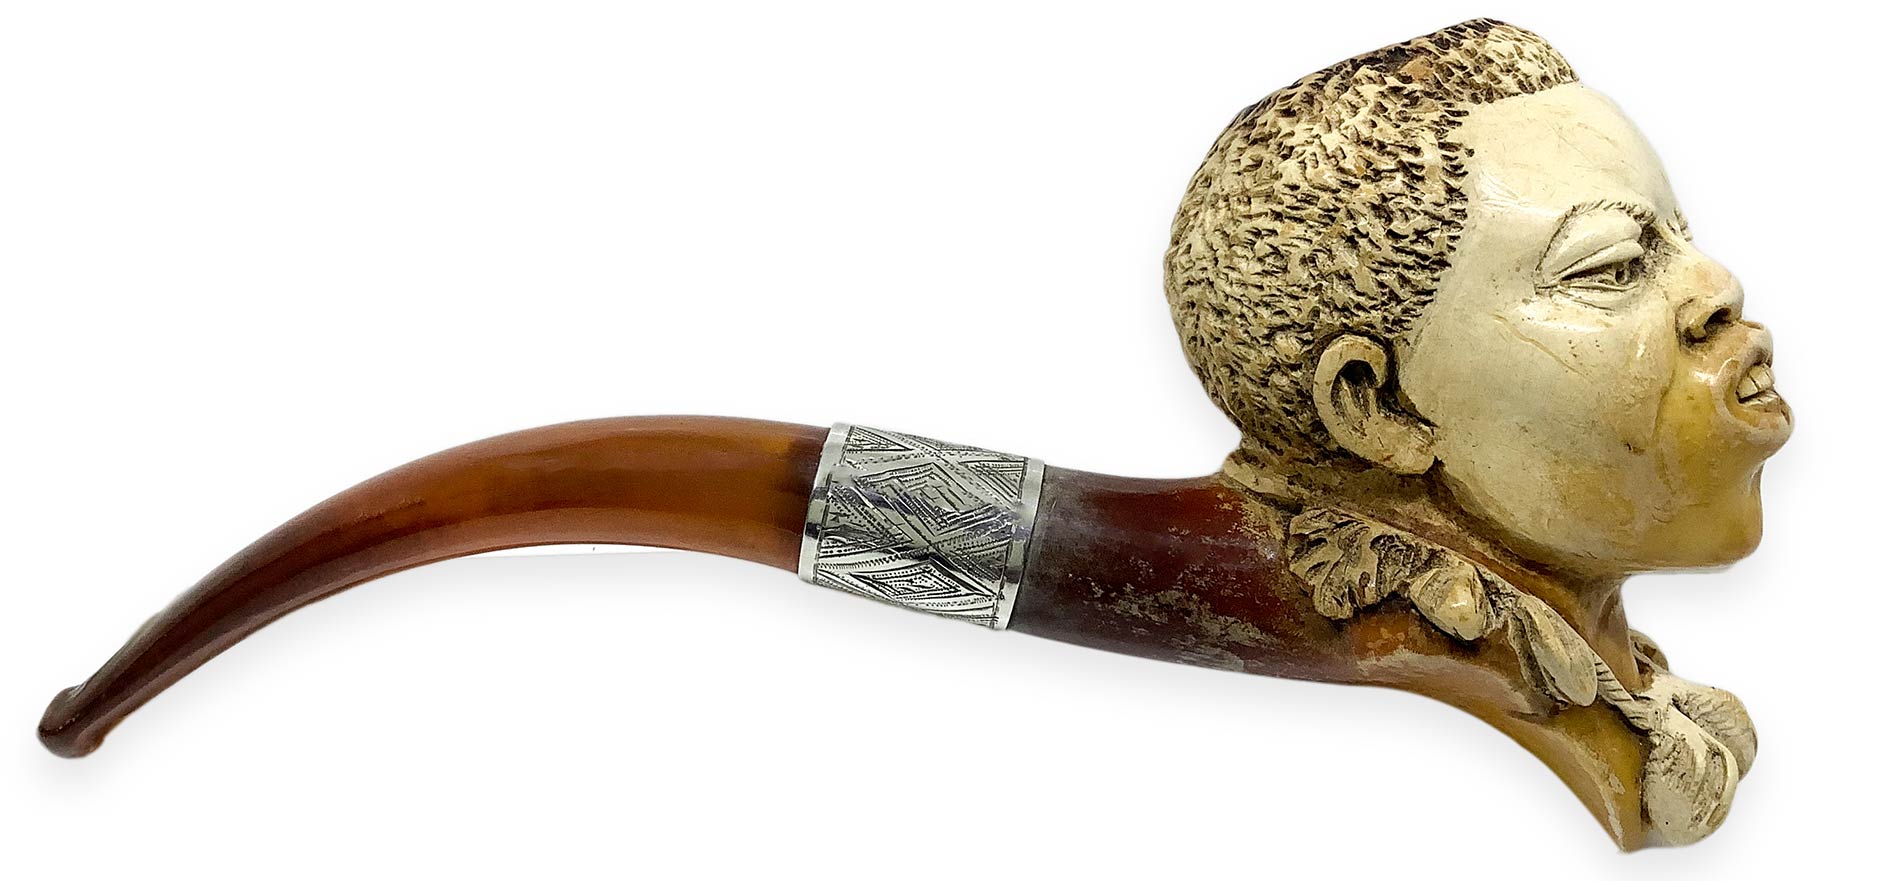 Pipe "African character" - Vienna, Austria. Late 1800s. The tobacco chamber and the shank of the - Image 2 of 5